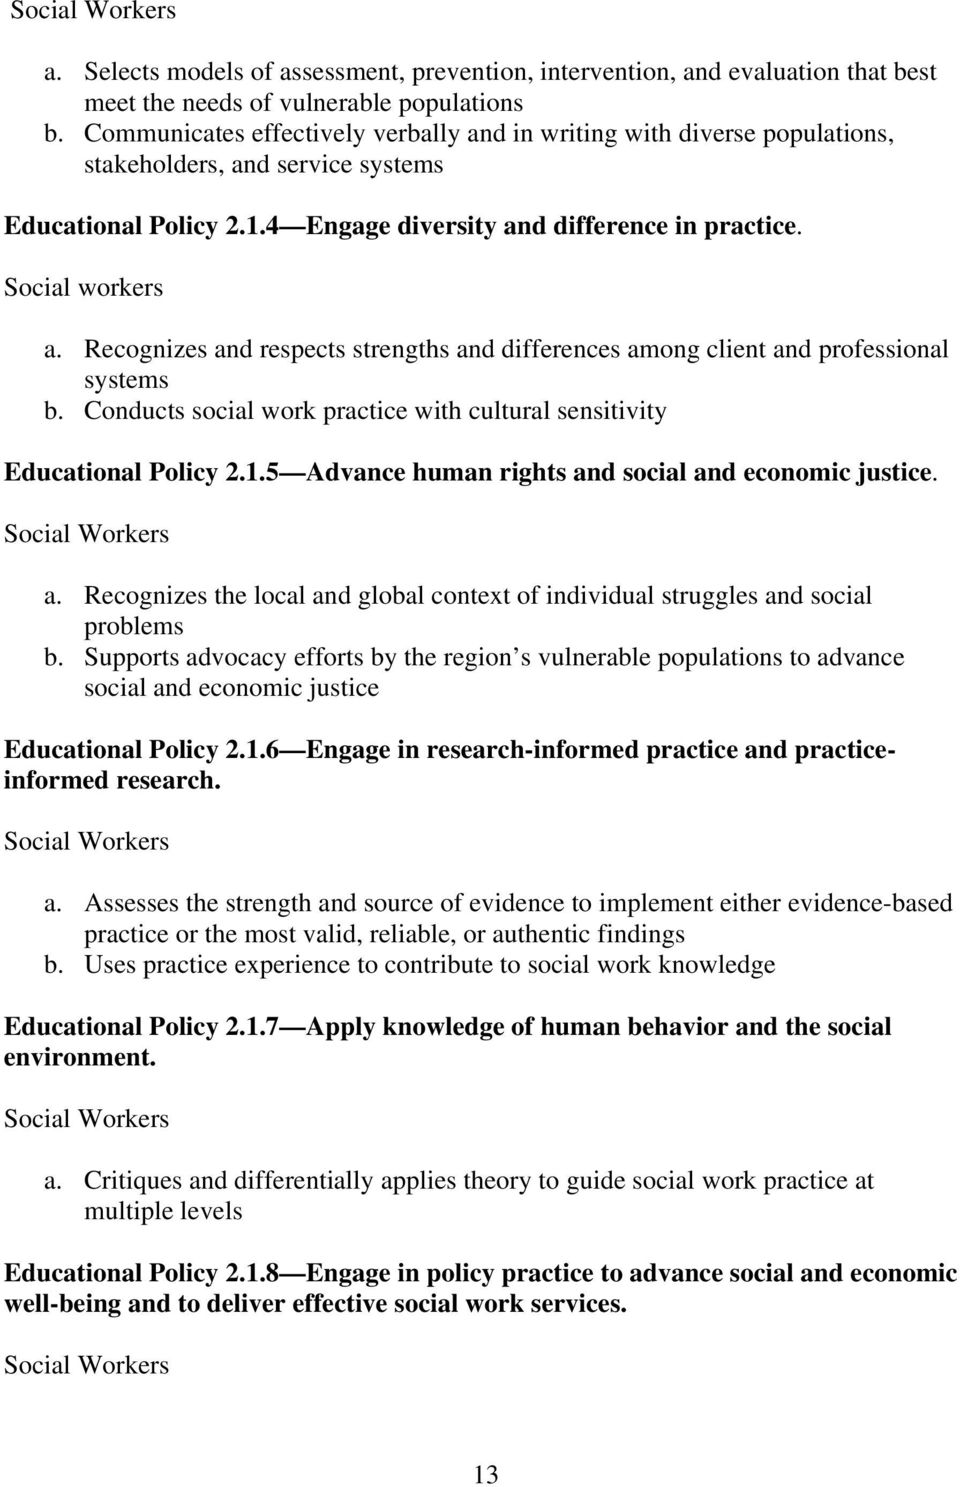 Recognizes and respects strengths and differences among client and professional systems b. Conducts social work practice with cultural sensitivity Educational Policy 2.1.